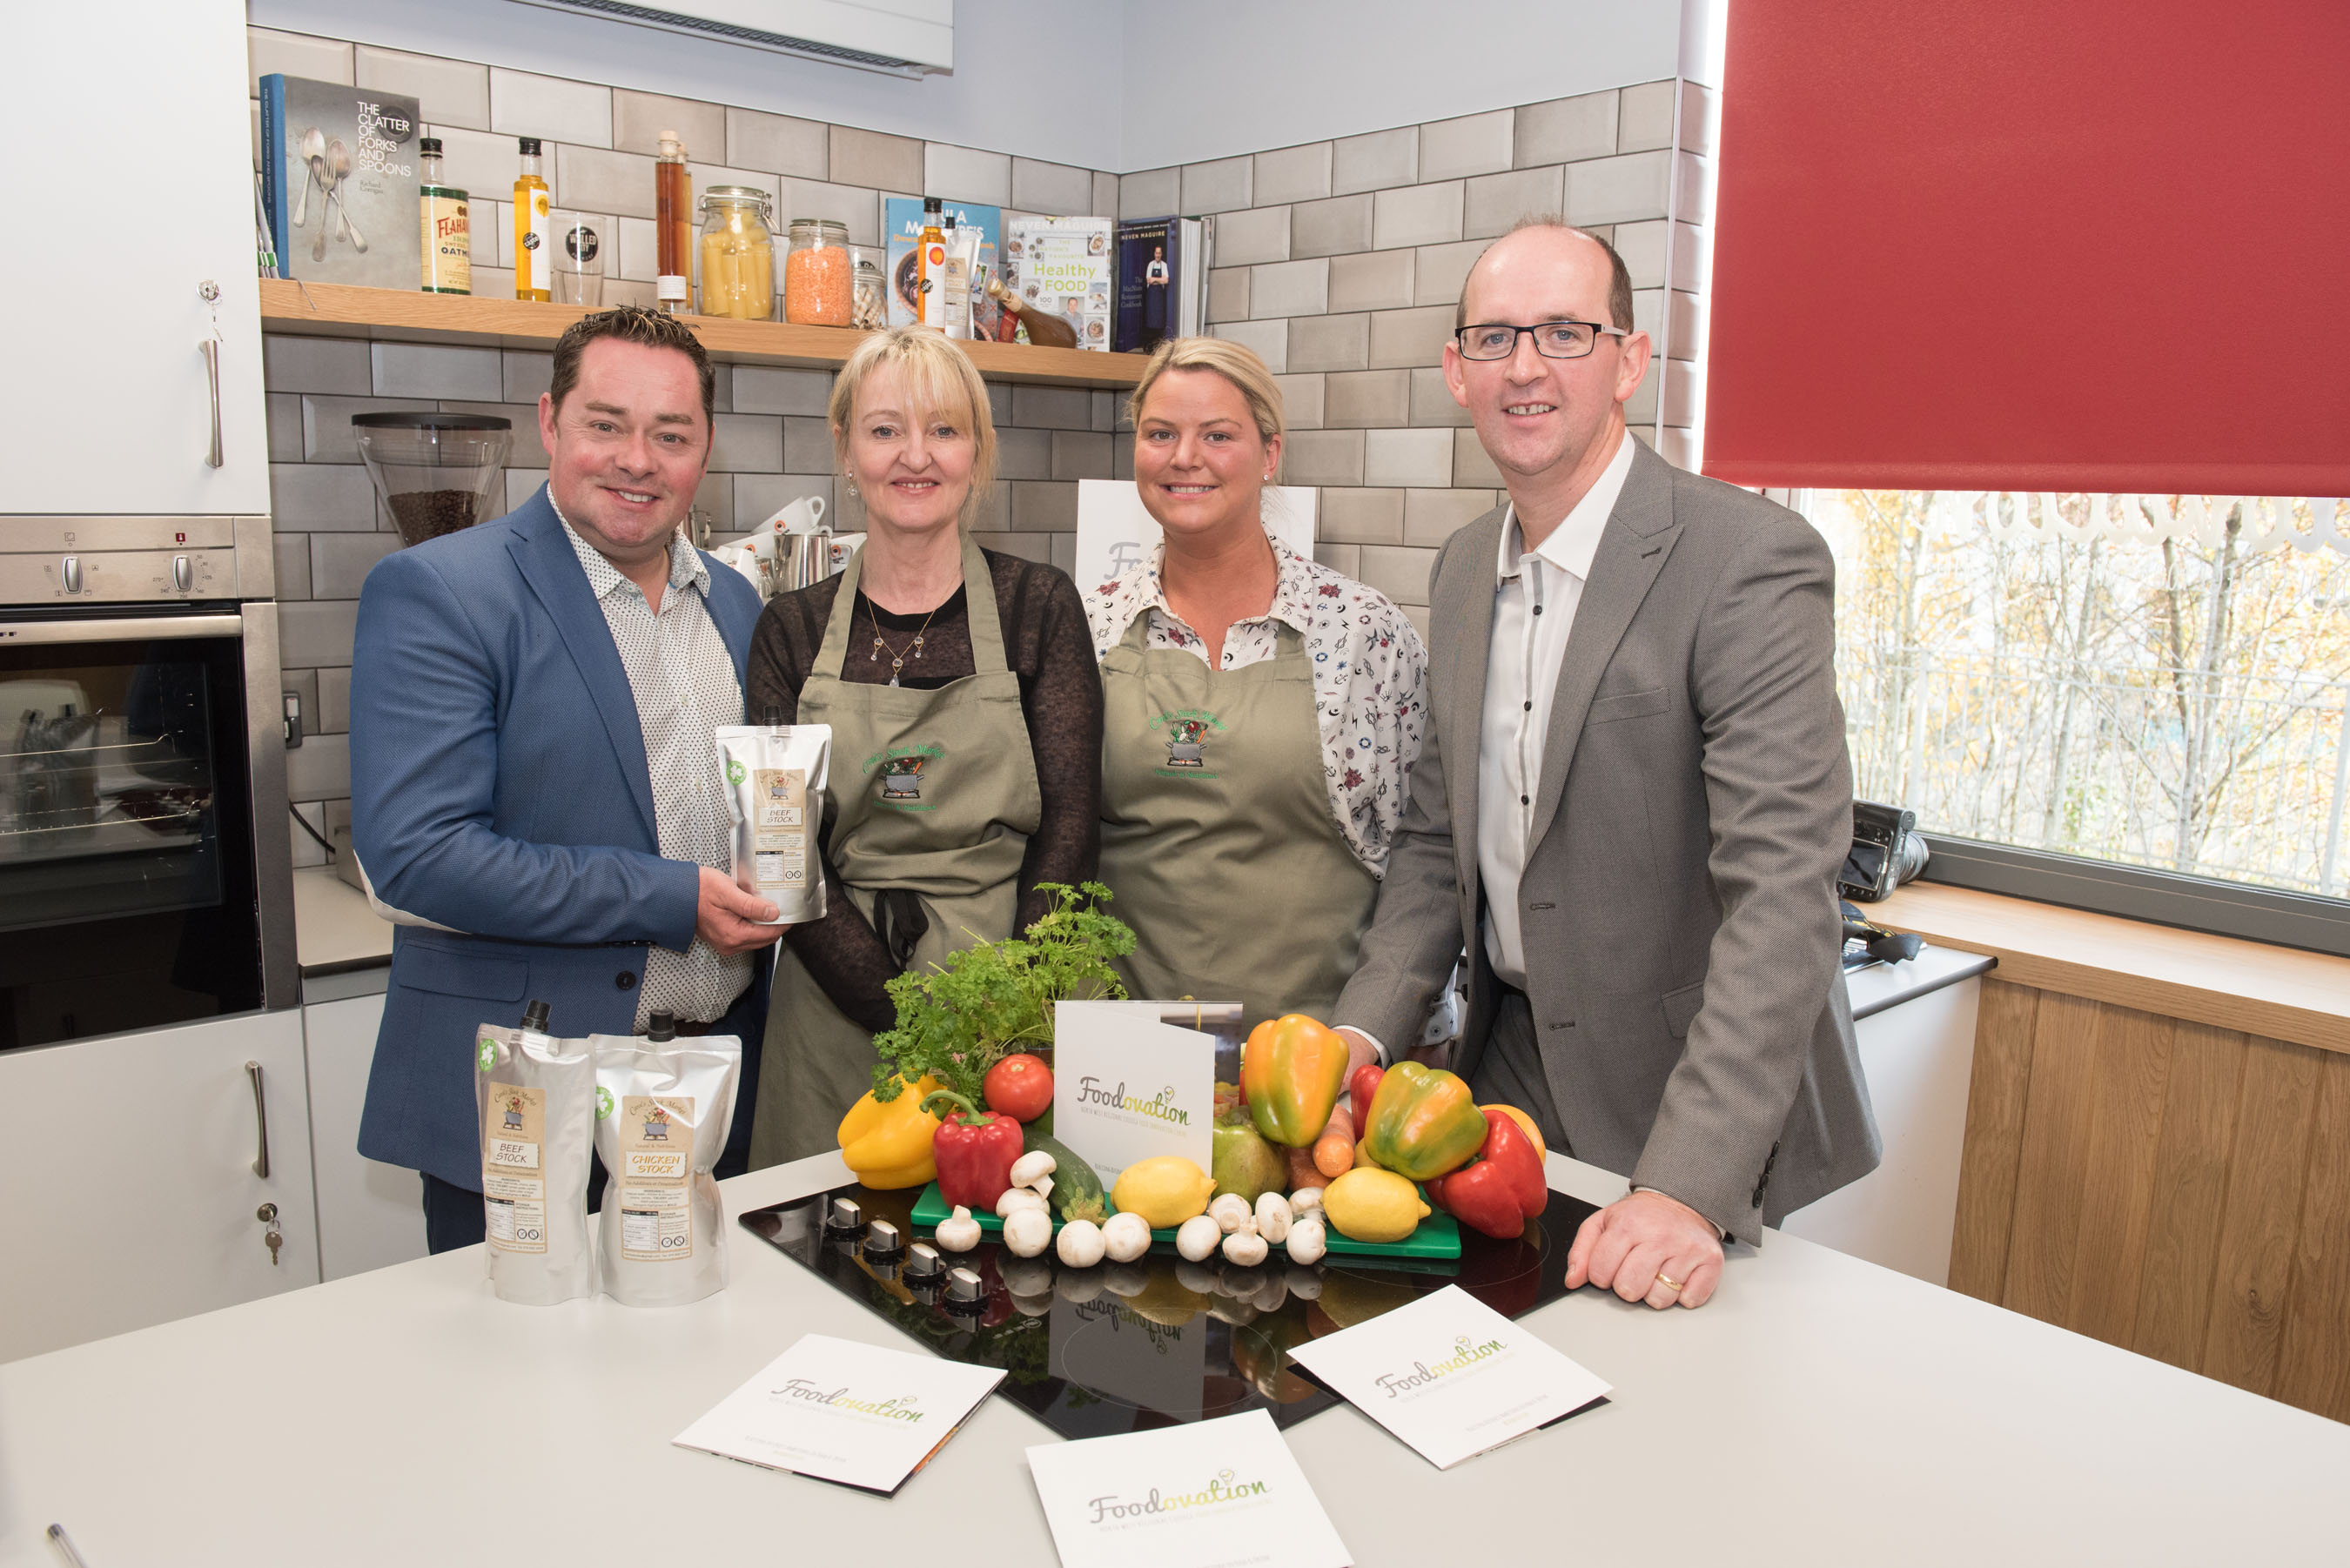 NWRC Foodovation Client Carols Stock Market with Irish Chef Neven Maguire and Foodovation Manager Brian McDermott